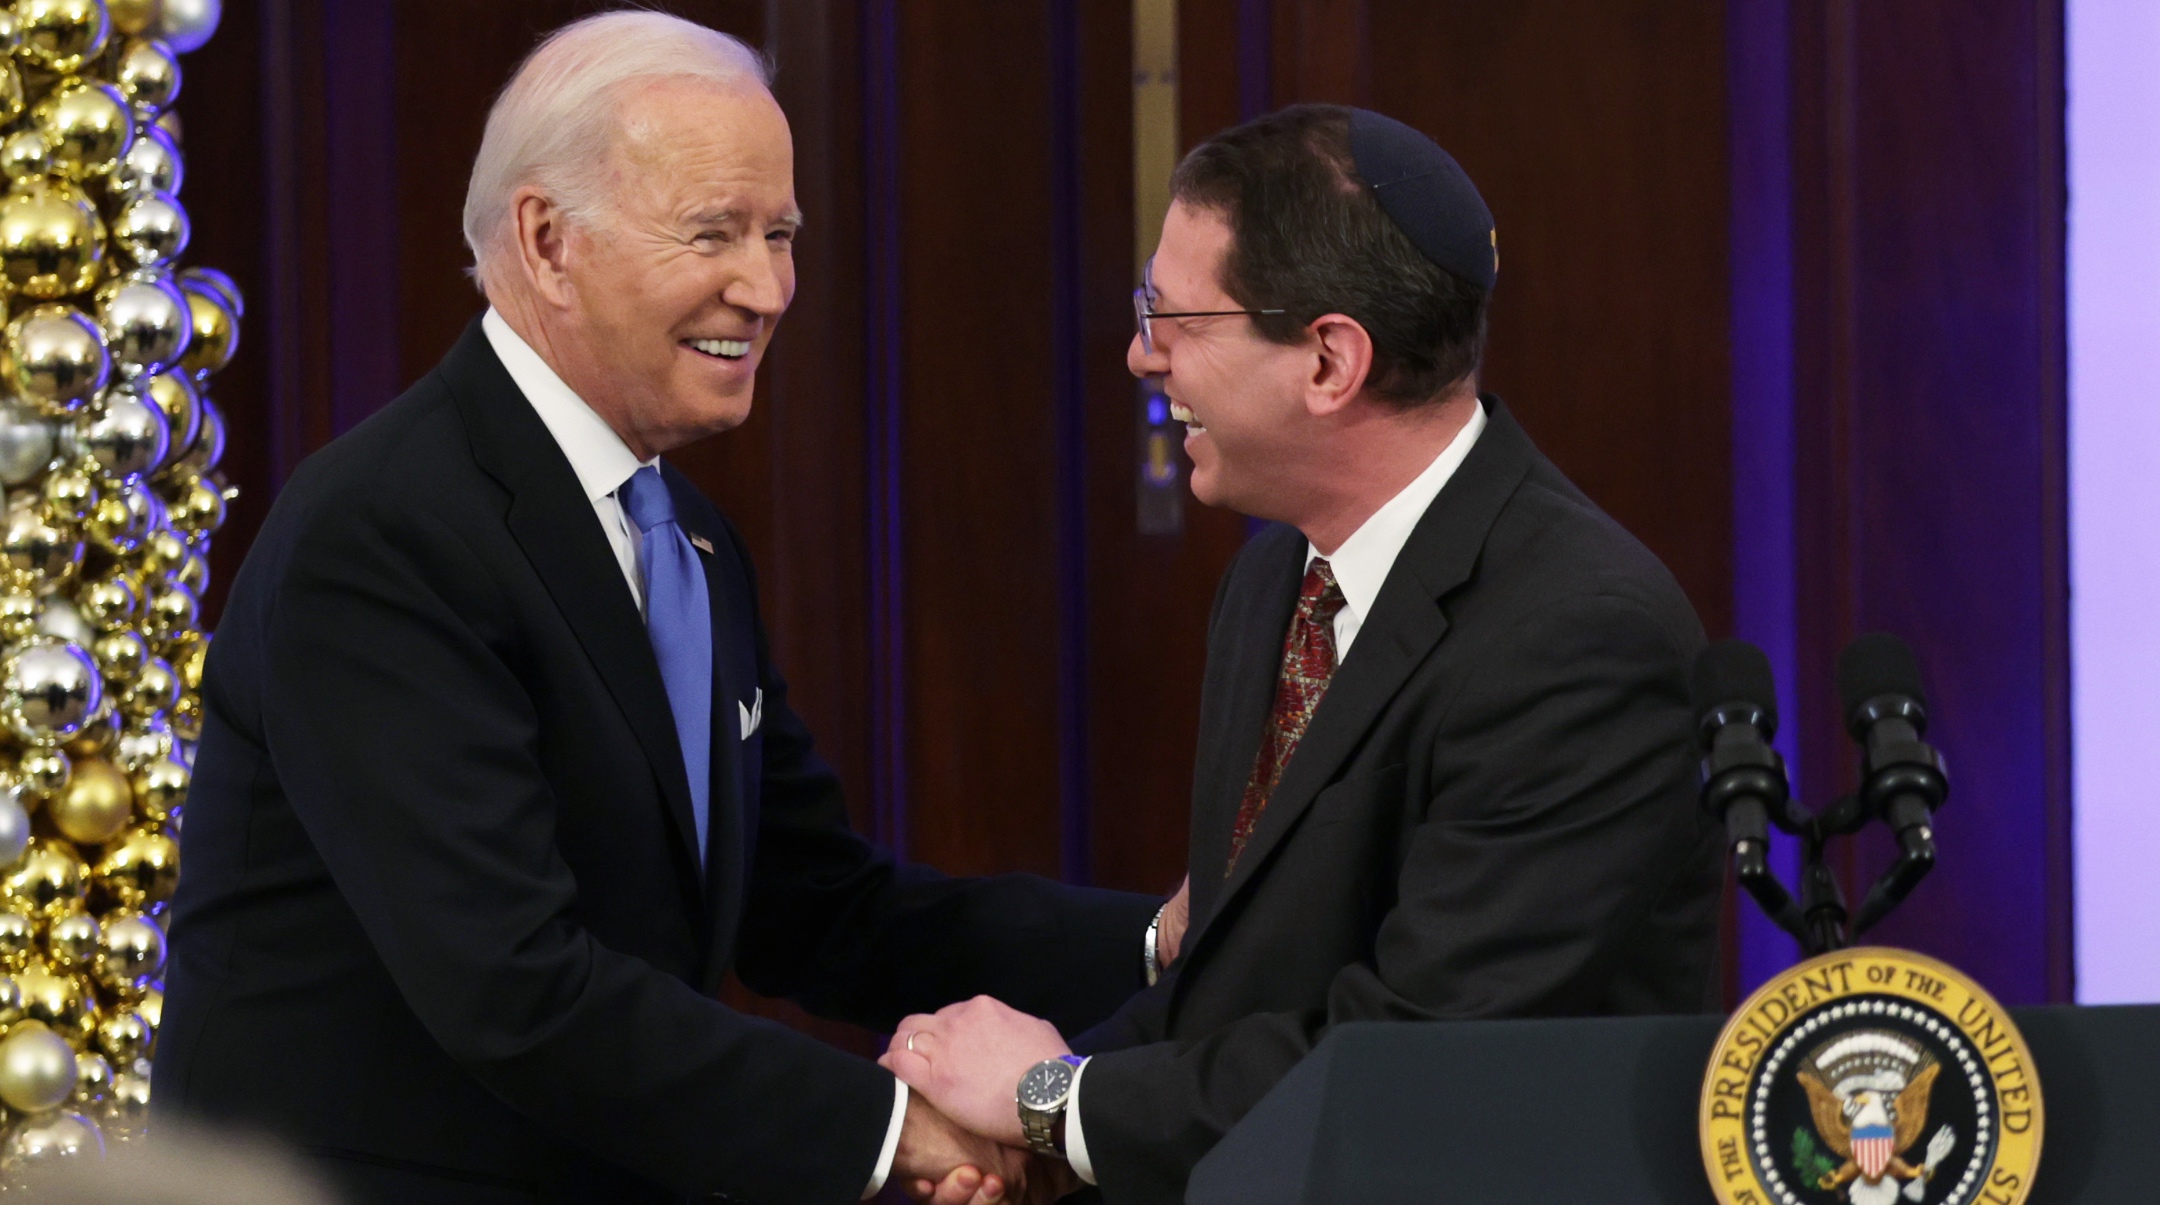 President Joe Biden shakes hands with Rabbi Charlie Cytron-Walker during a Hanukkah holiday reception in the Grand Foyer of the White House, Dec. 19, 2022. (Alex Wong/Getty Images)